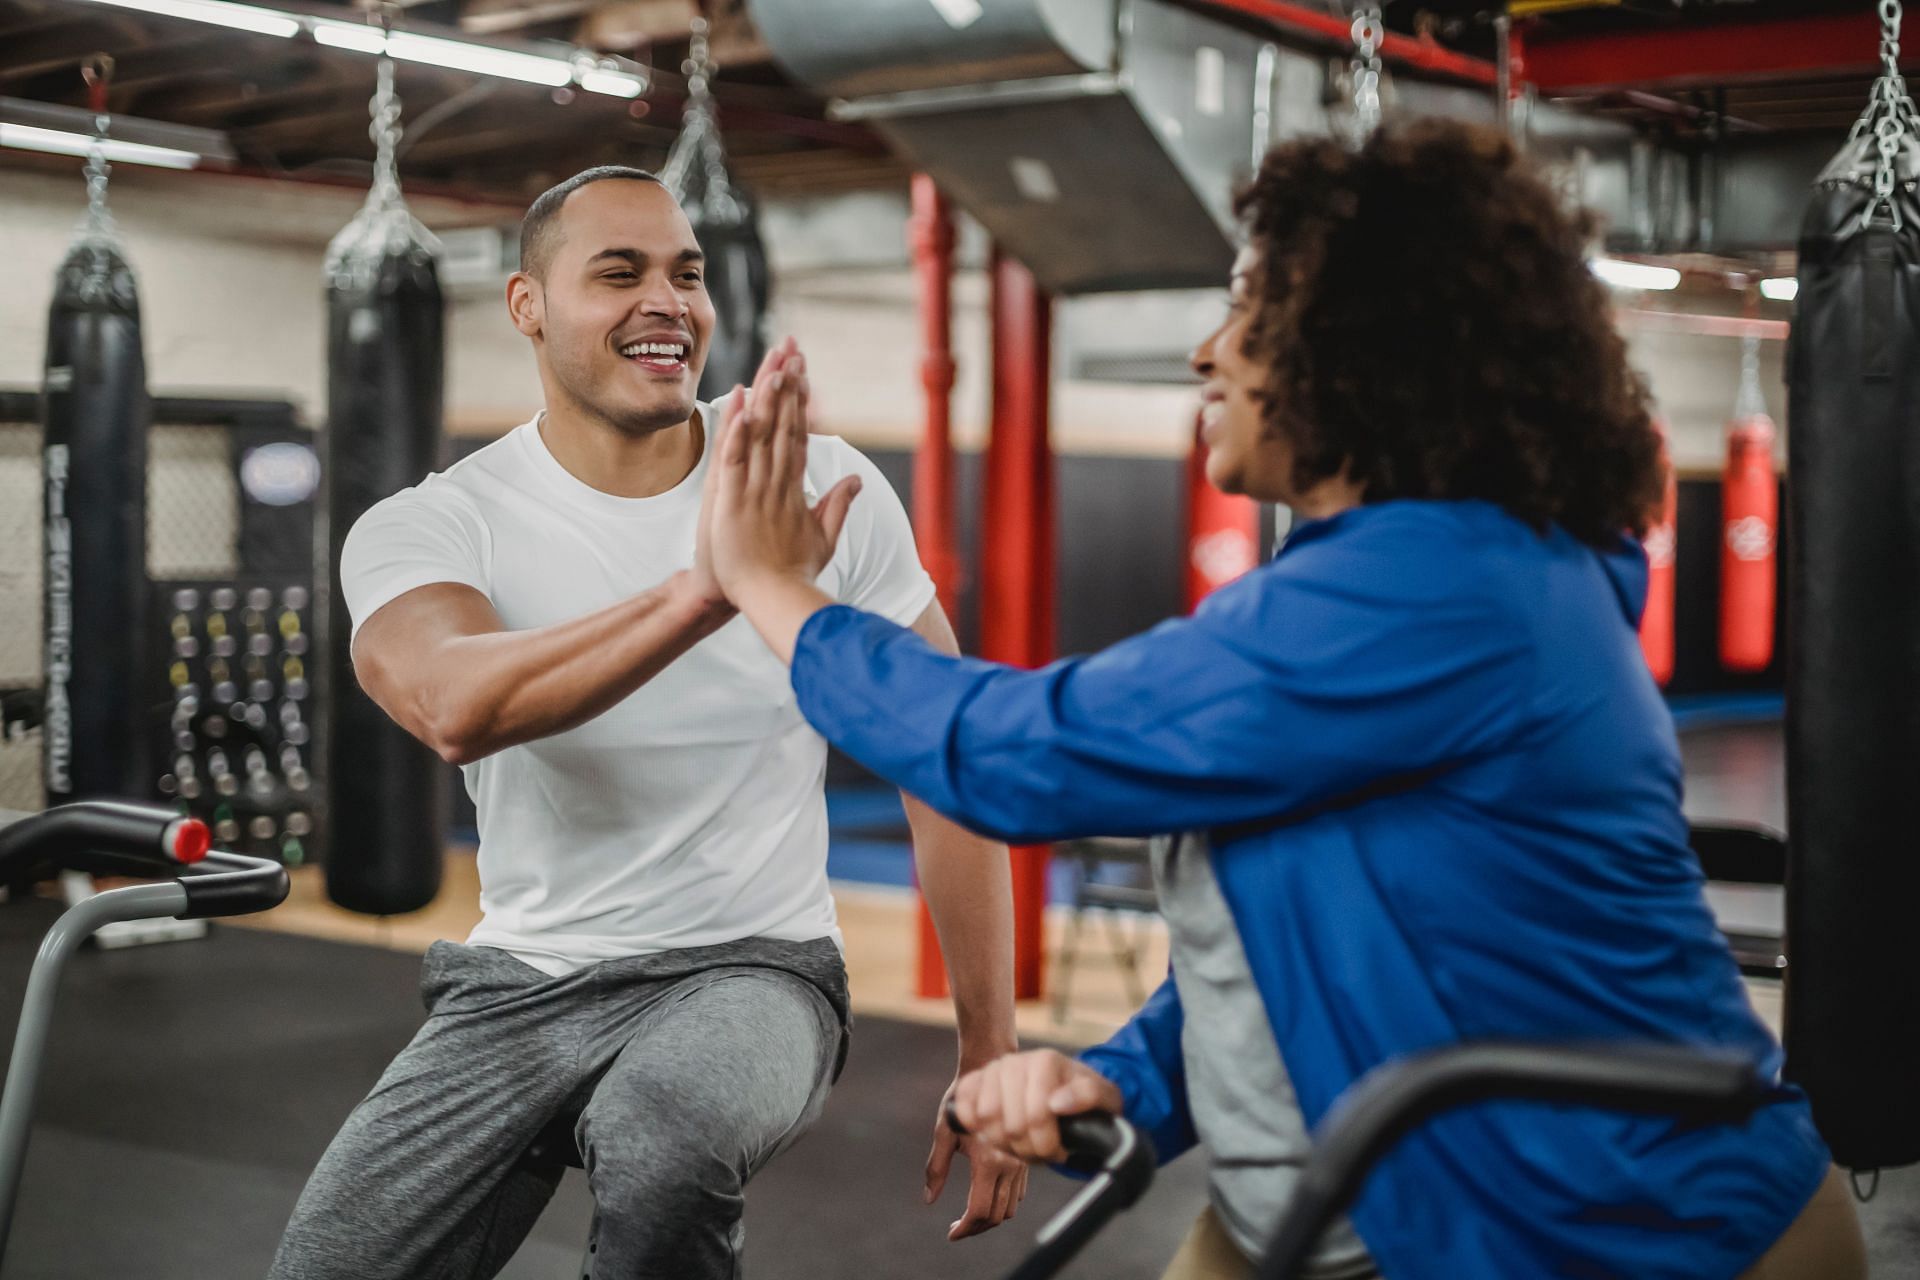 Working out with an instructor or someone who is familiar with your condition can help you in case of emergency (Image via Pexels/Julia Larson)